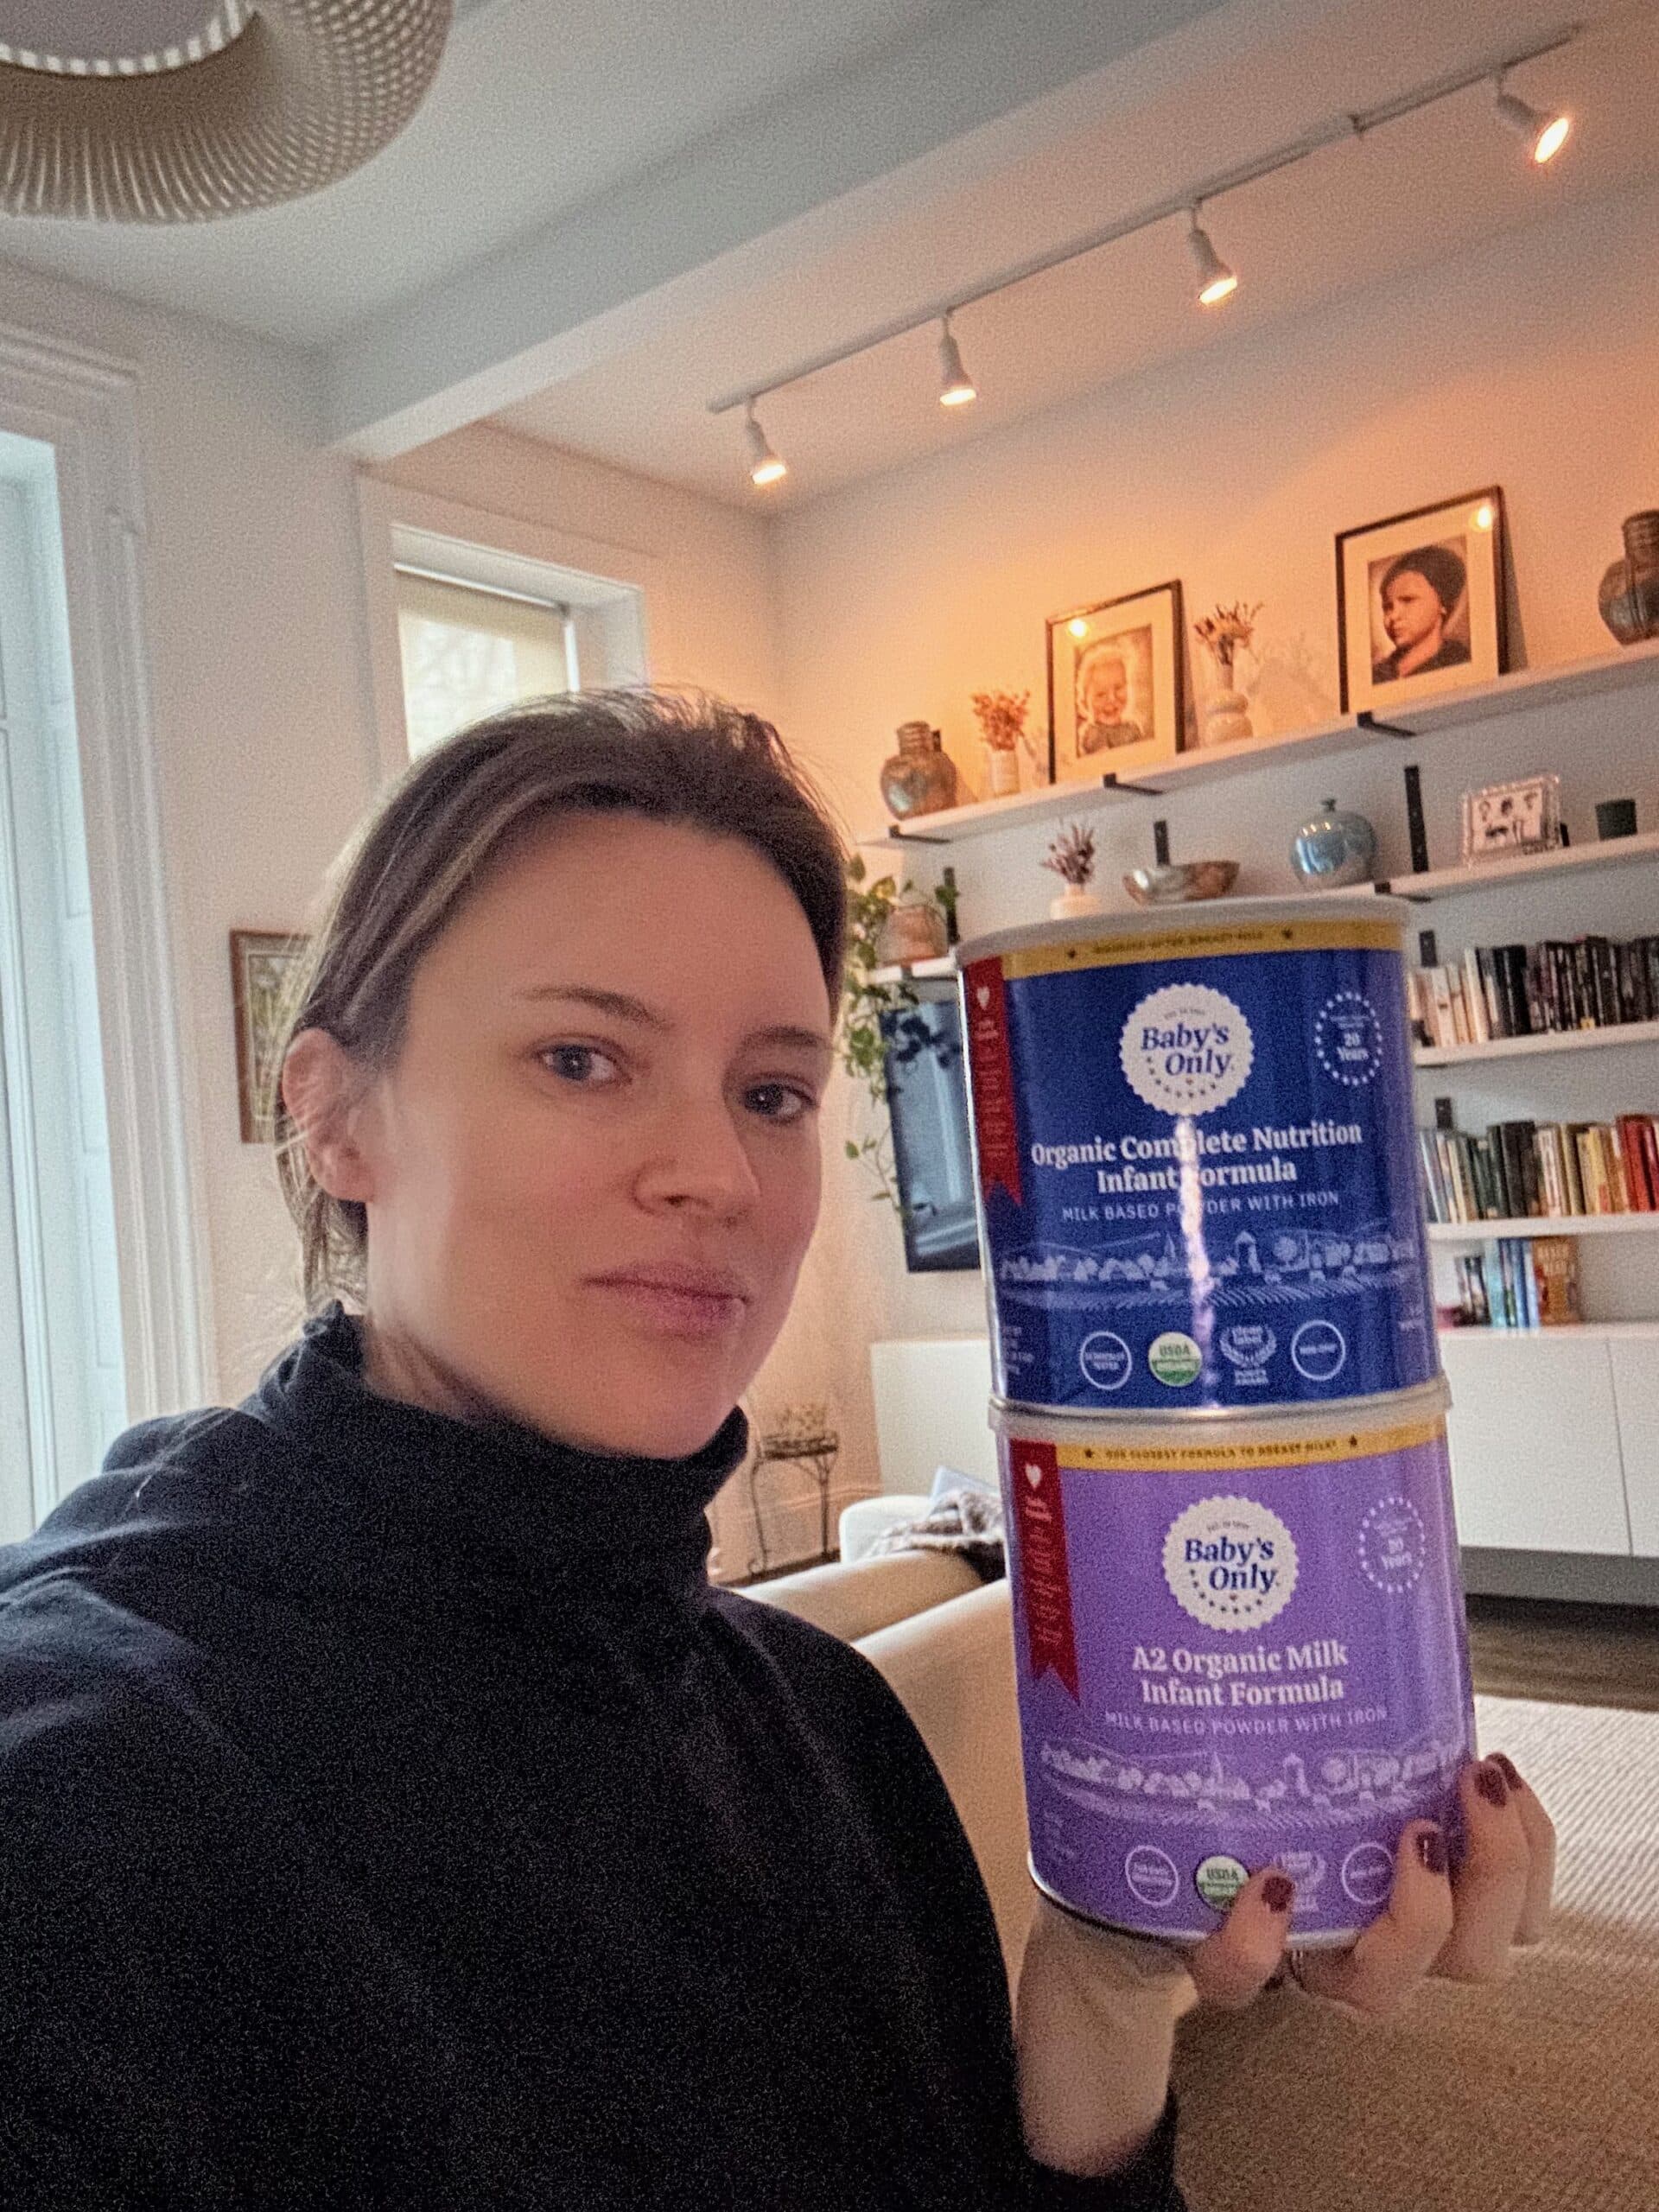 Maia from Gimme the Good Stuff holds cans of Baby's Only healthy baby formula